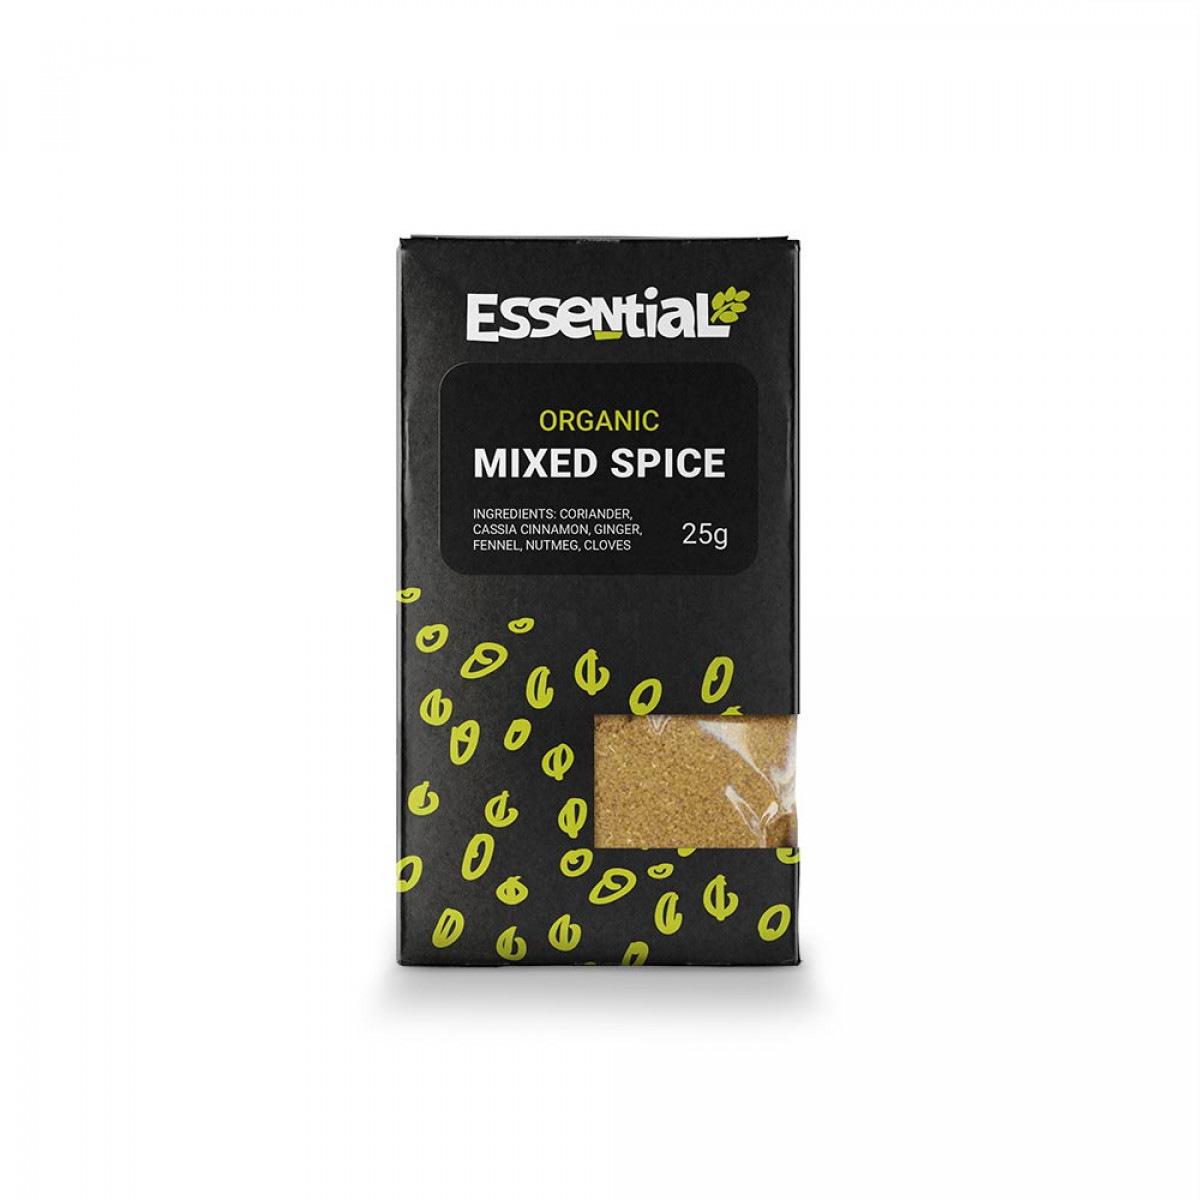 Product picture for Mixed Spice